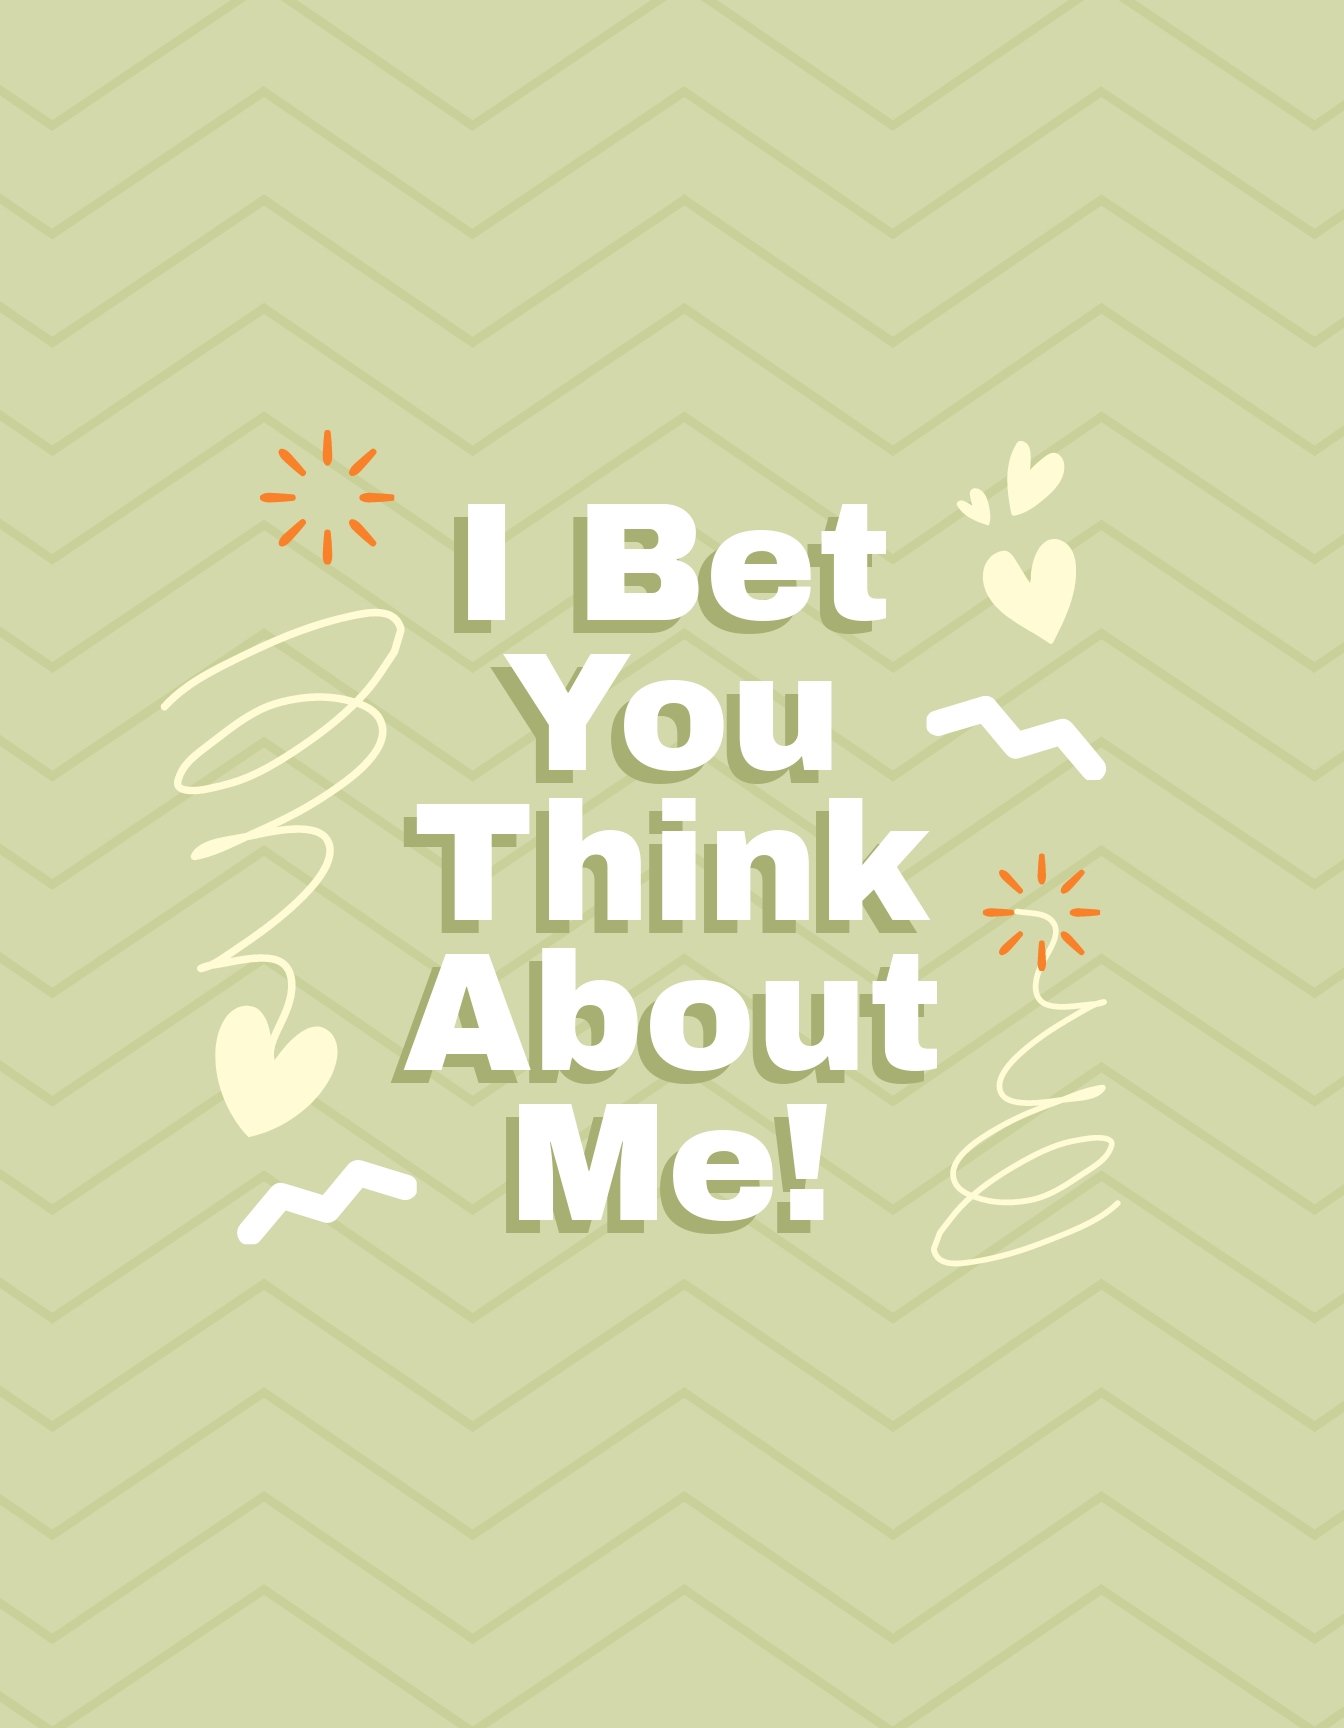 I Bet You Think About Me Tshirt Template